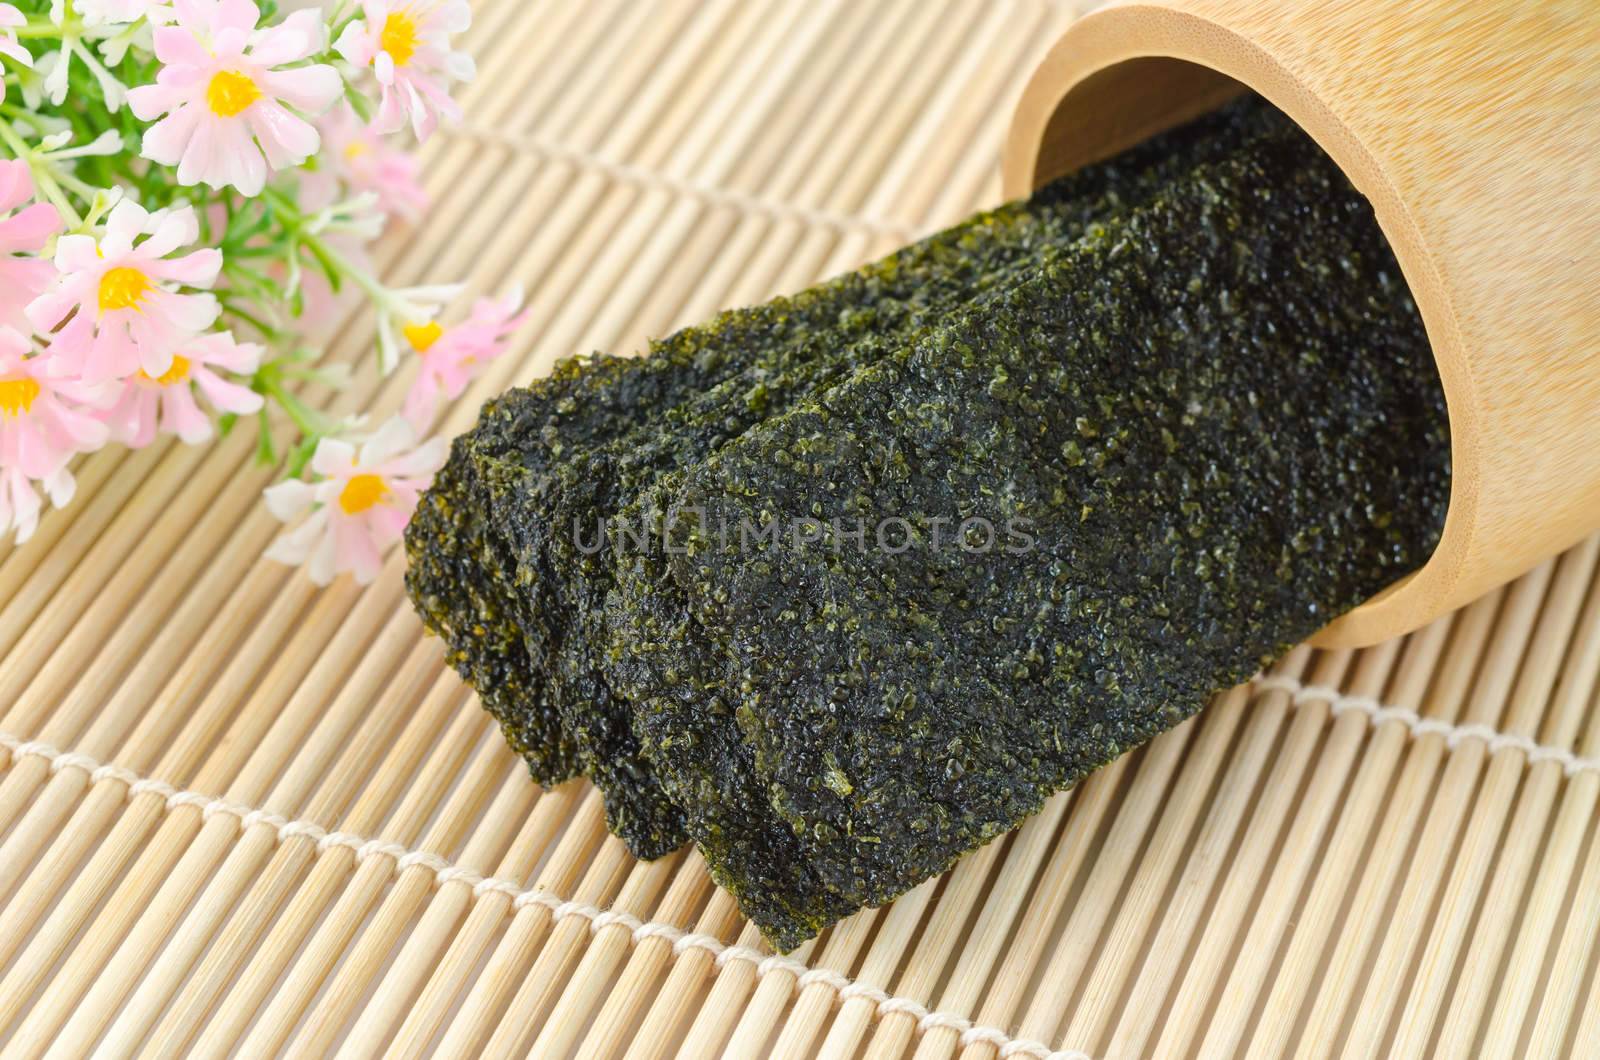 Fried seaweed in wooden cup with flower on bamboo mat.